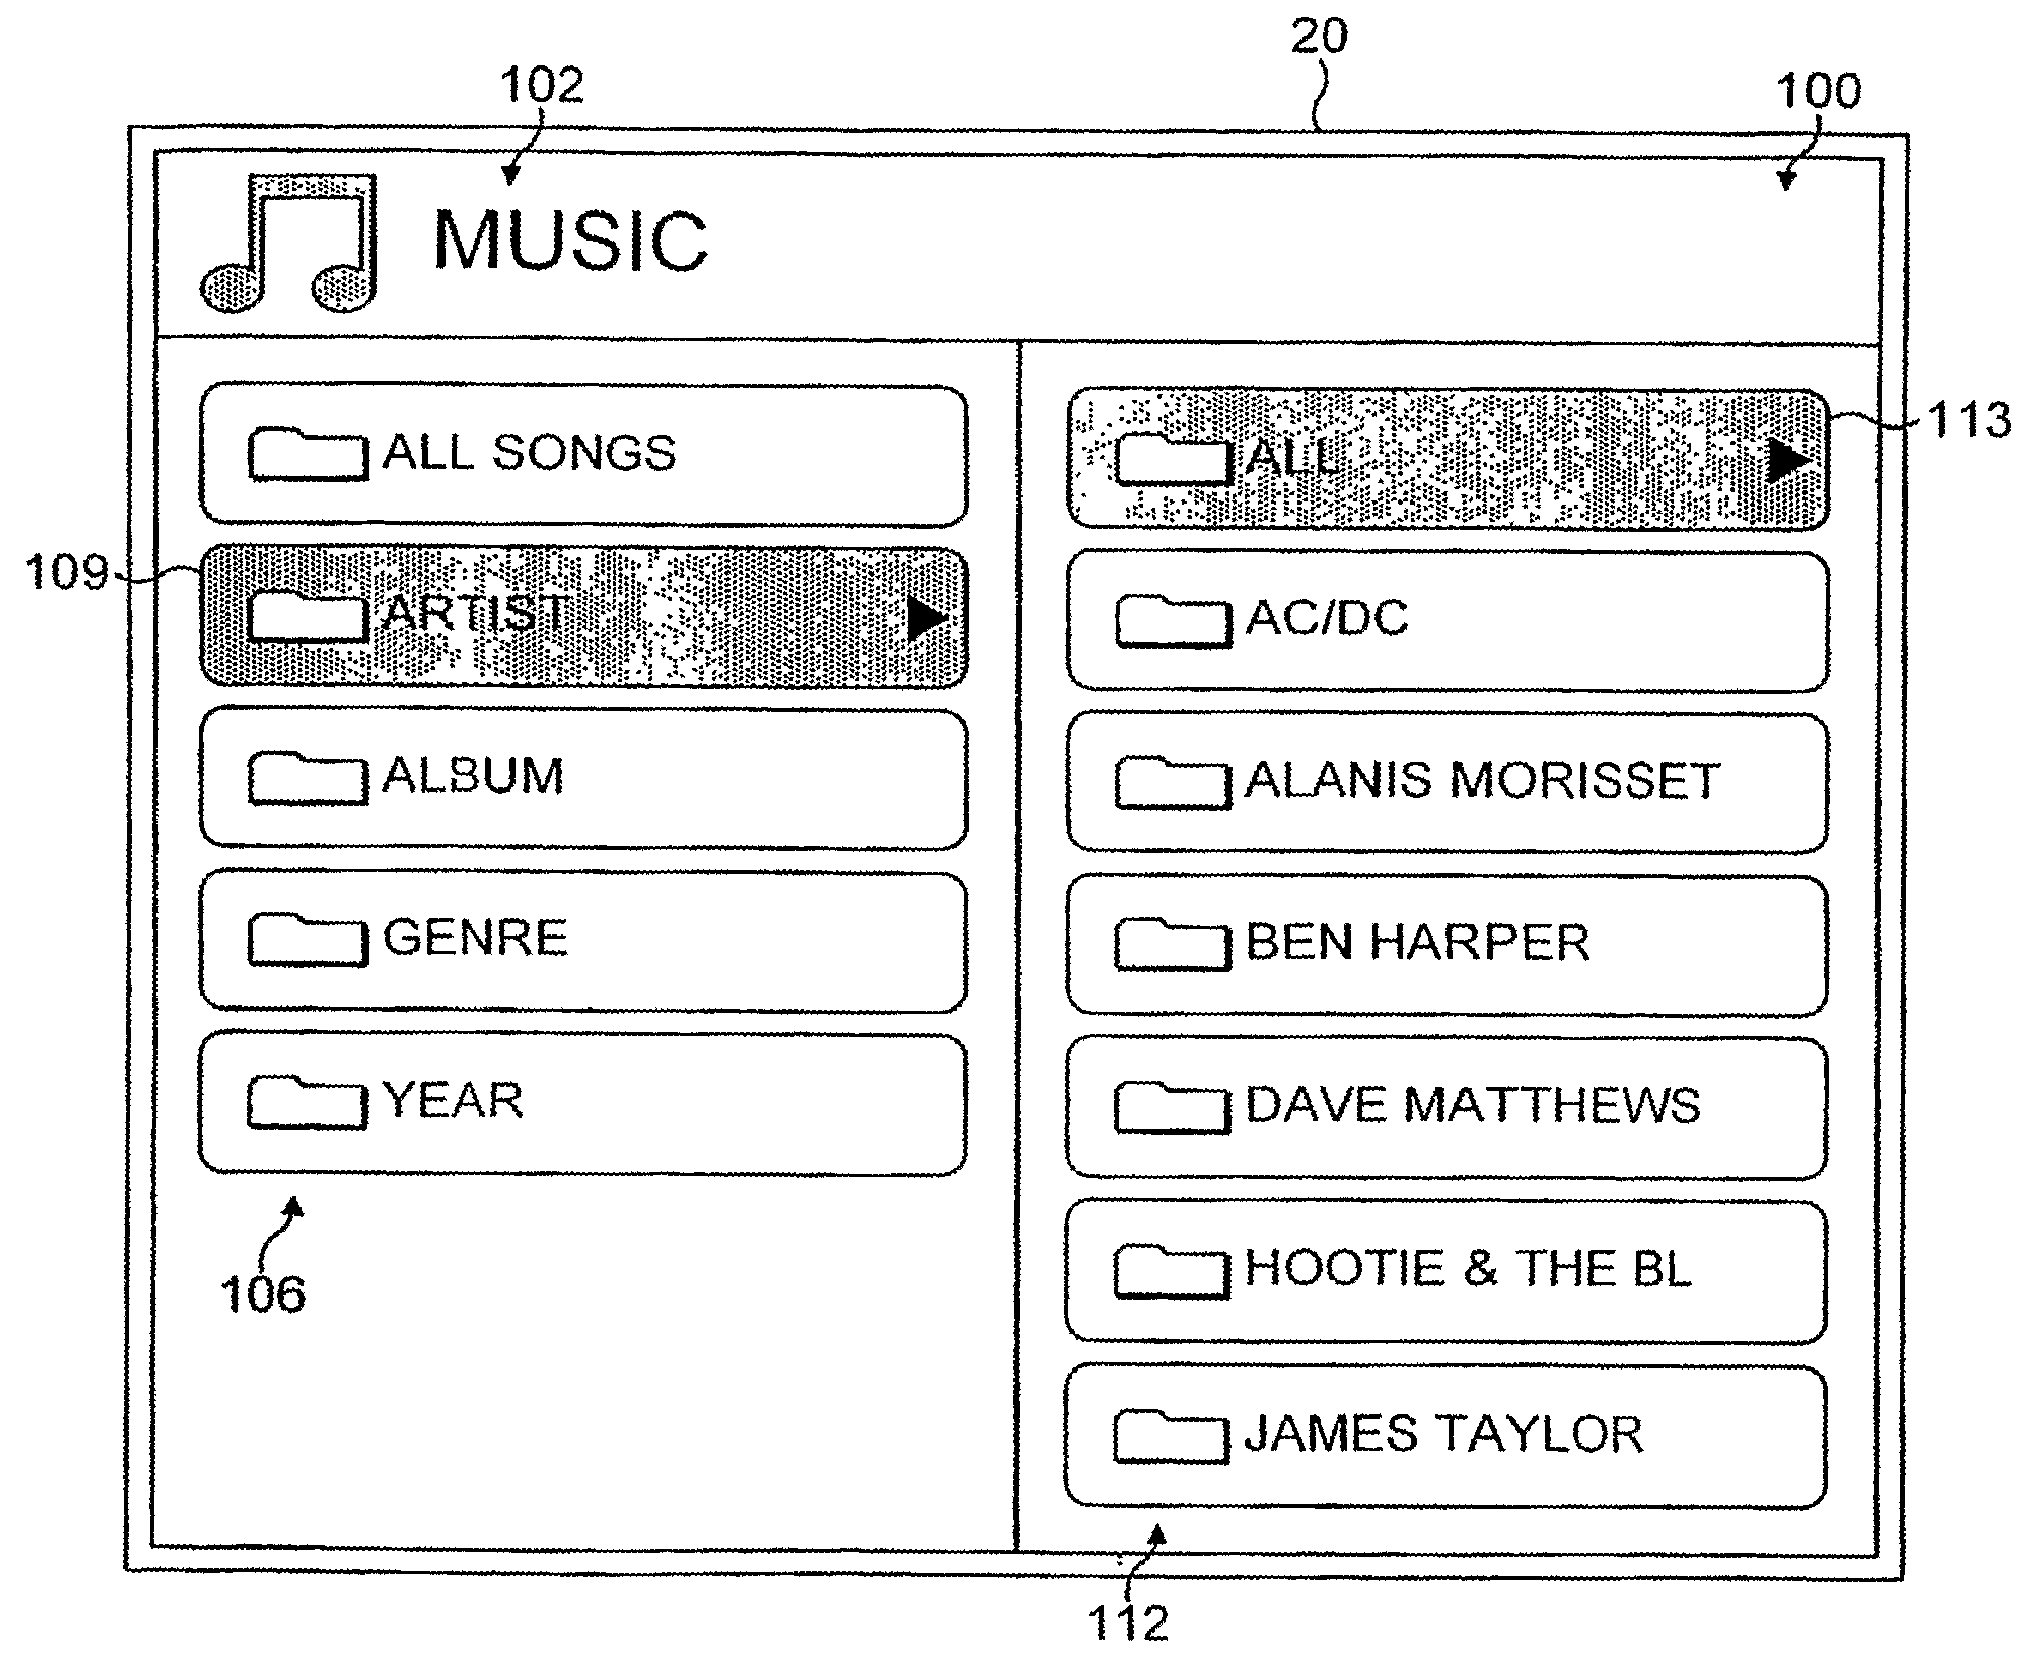 Creation of Digital Program Playback Lists in a Digital Device Based On Hierarchal Grouping of a Current Digital Program